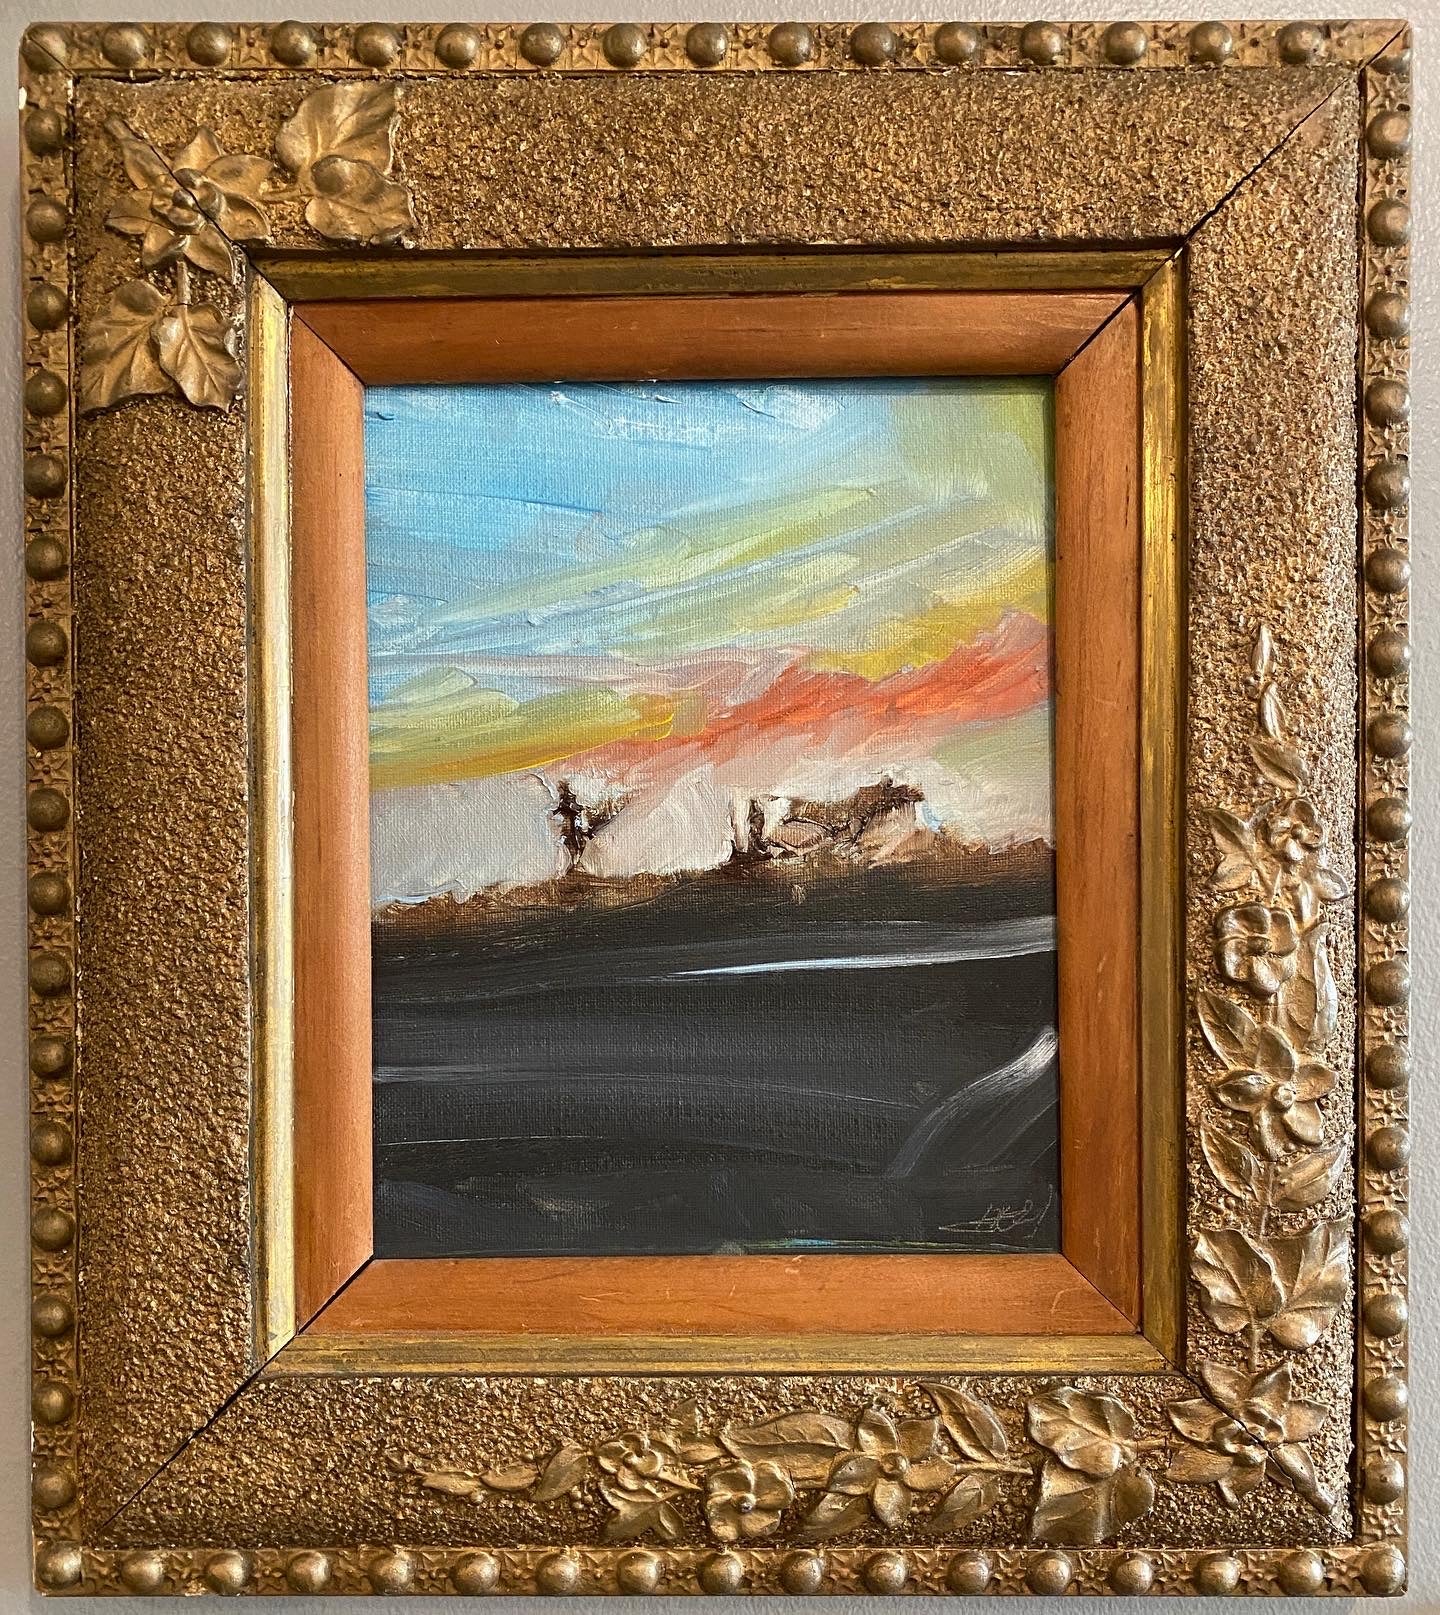 AUCTION BID NOW! Original Oil Painting w/ Ornate Gold Frame Signed by the artist